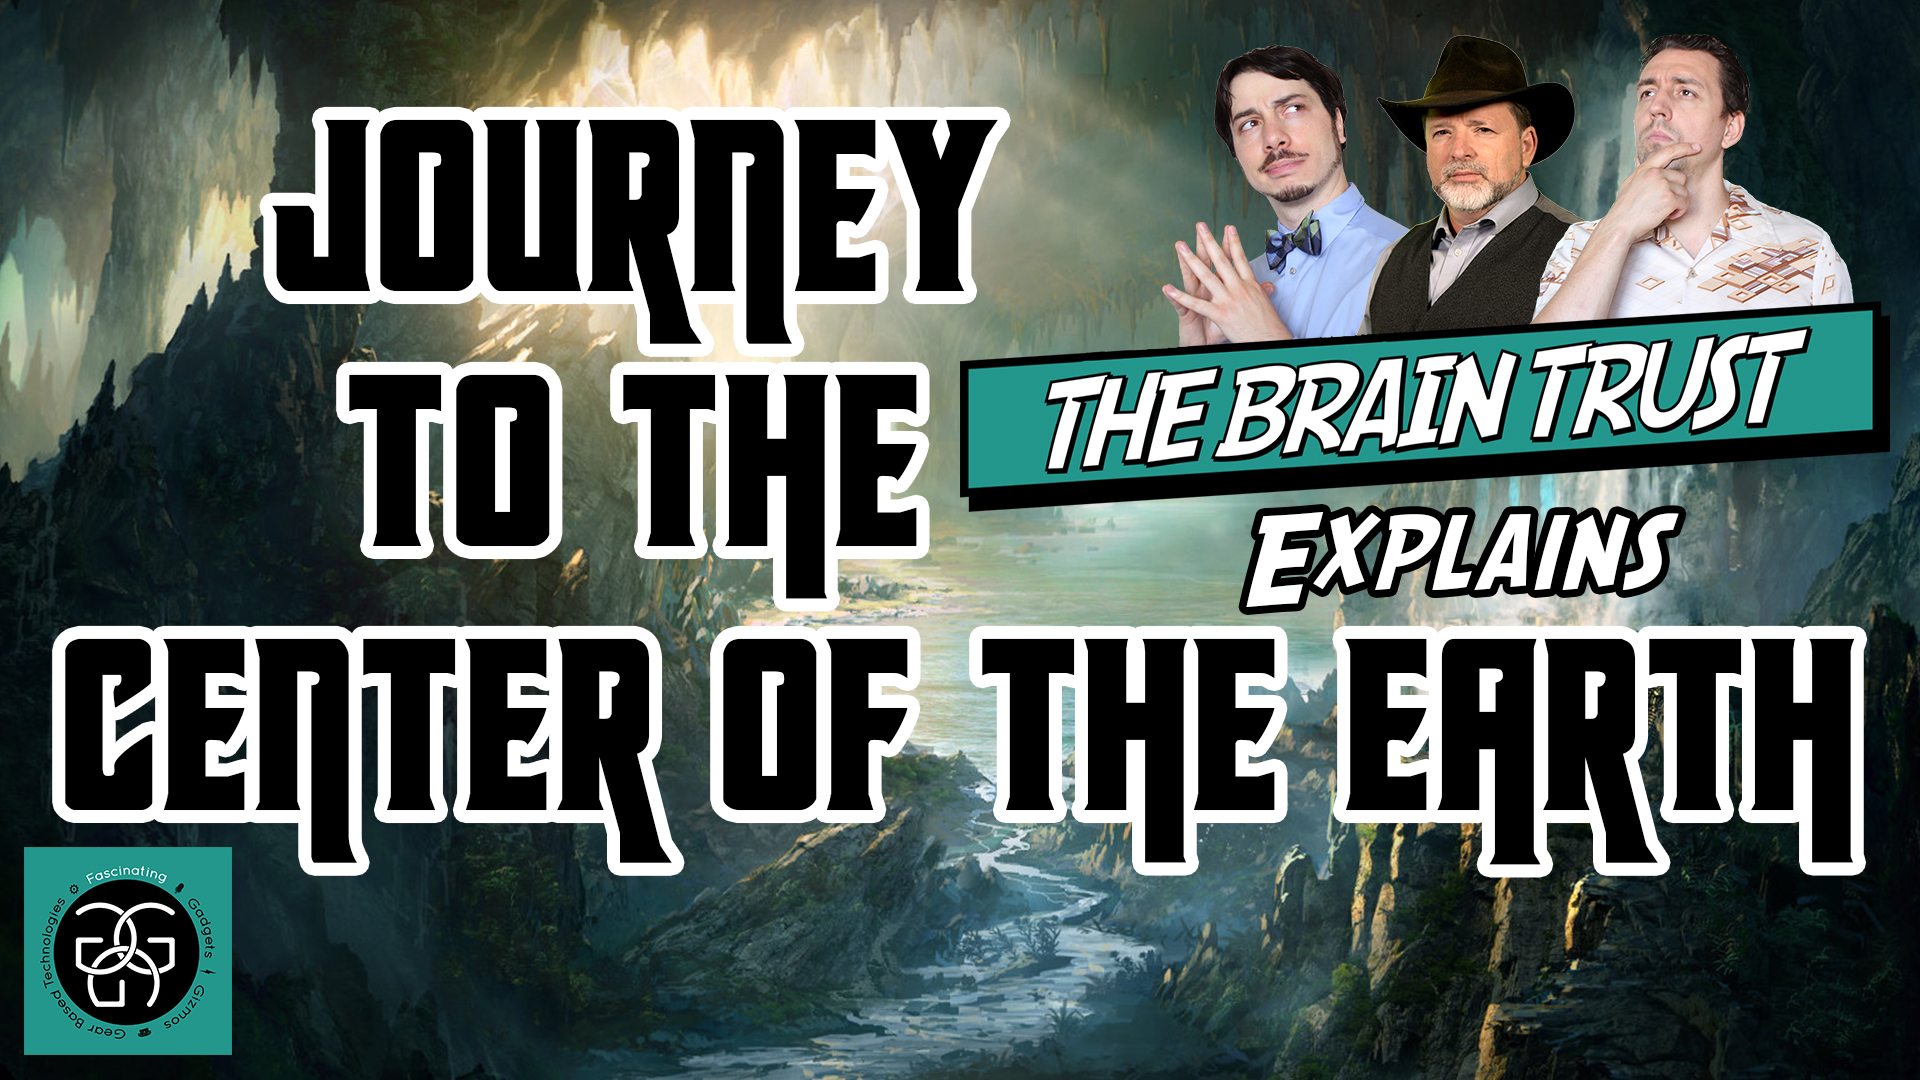 You are currently viewing Ep. 46 Journey to the Center of the Earth